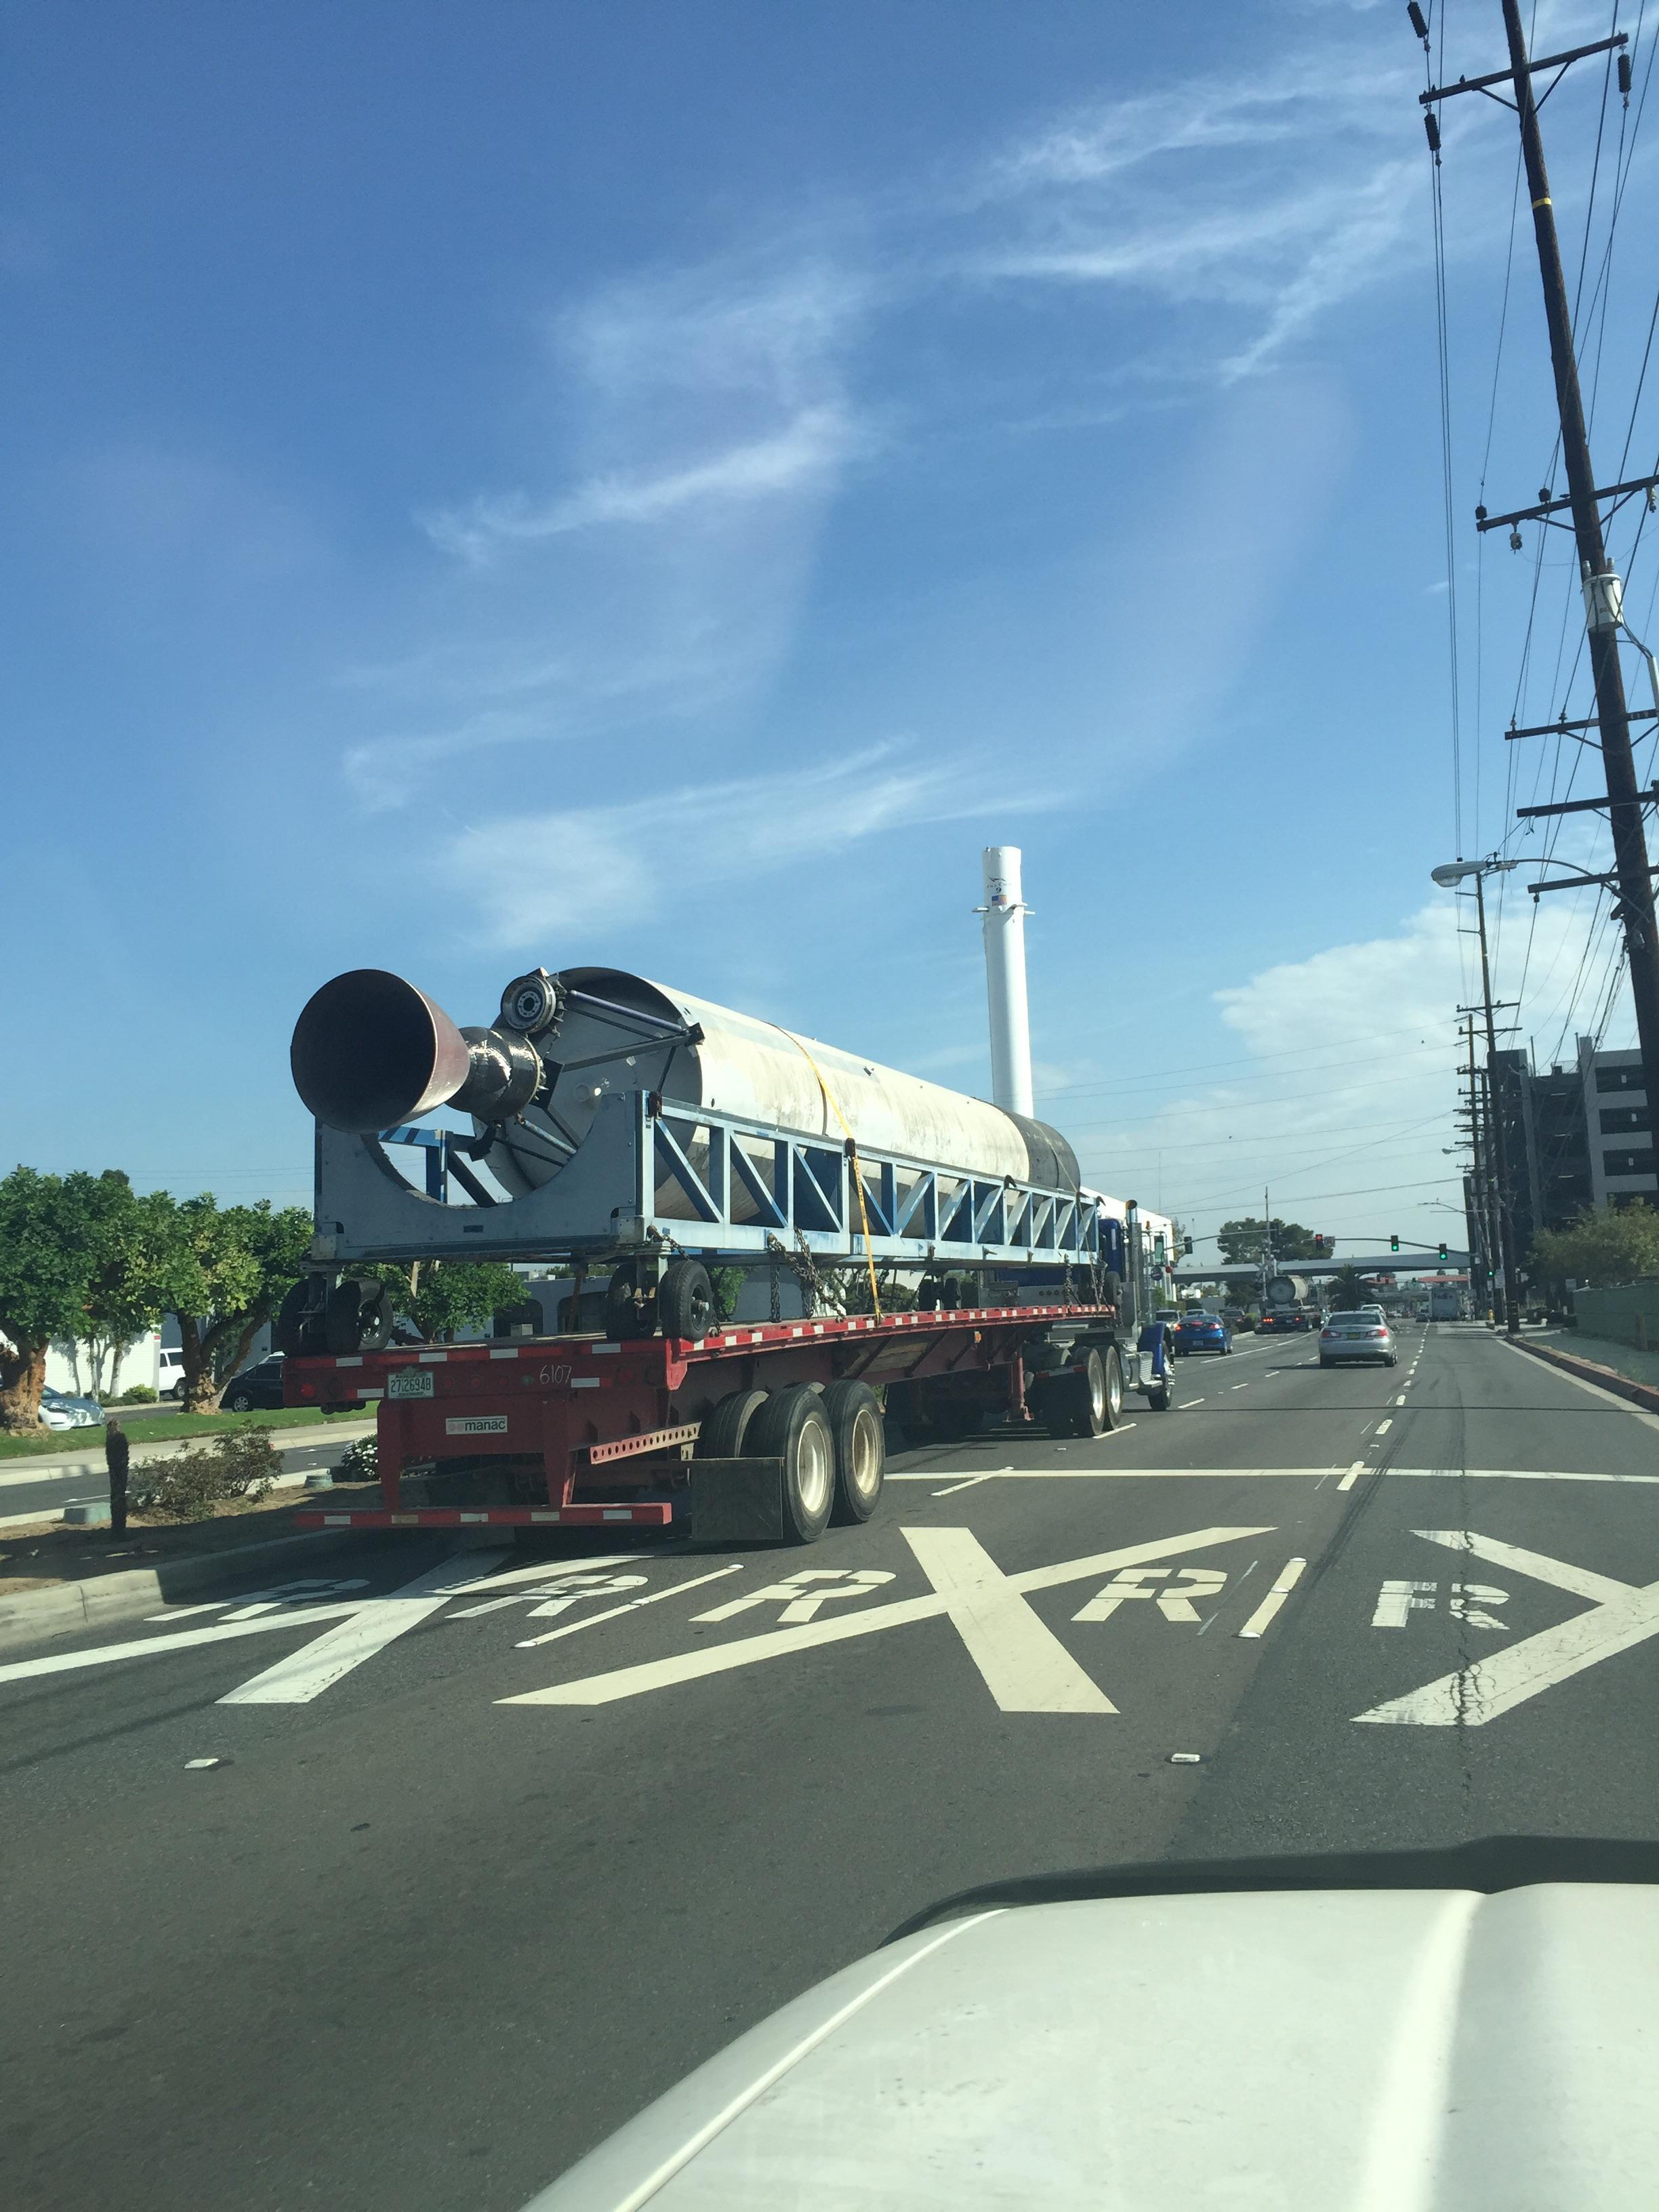 SpaceX Falcon 1 Logo - Falcon 1 getting refurbished? : spacex